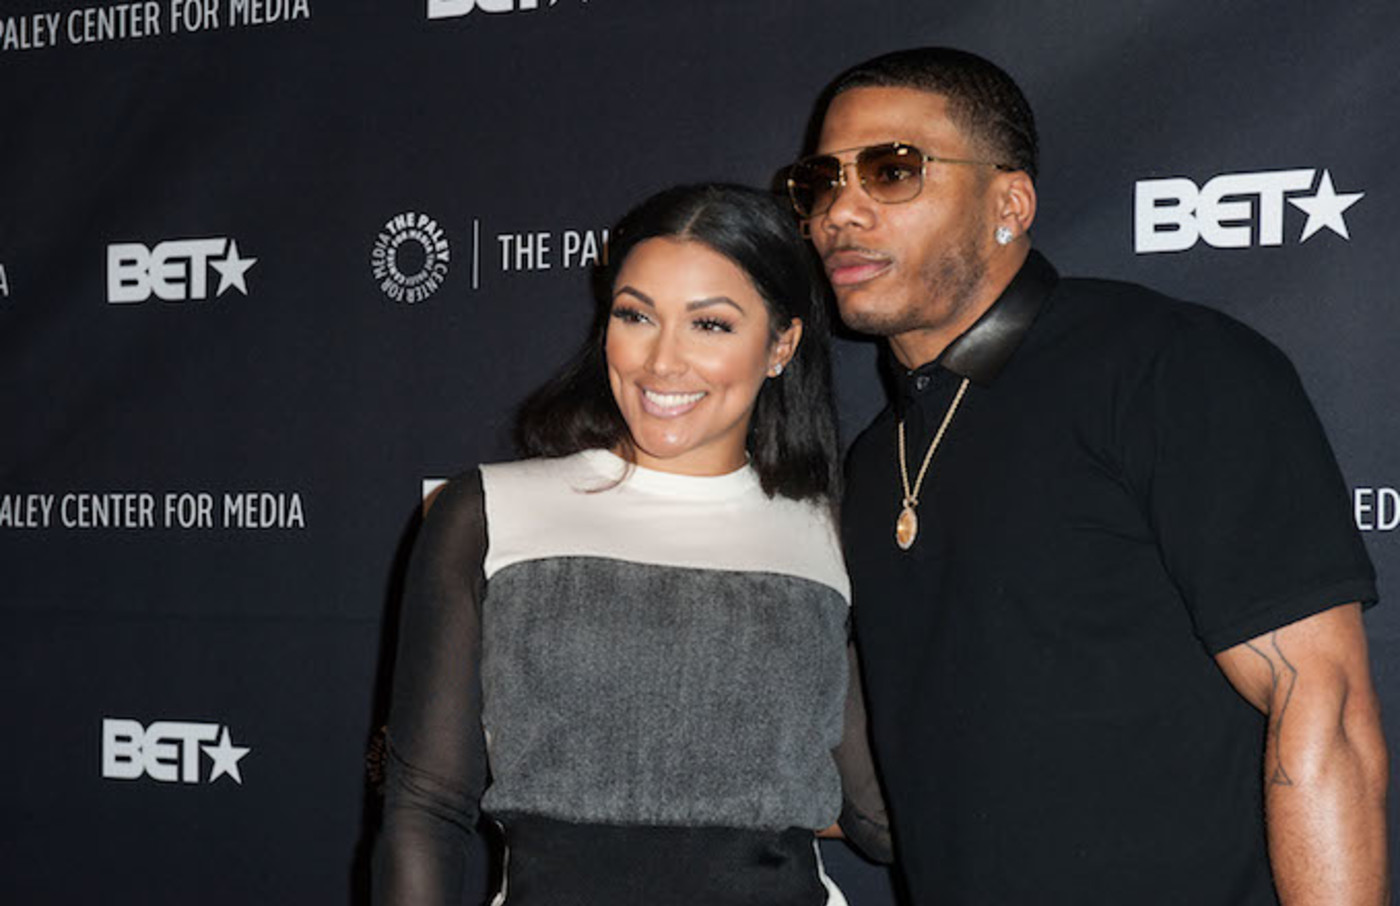 Nelly dating now 2018